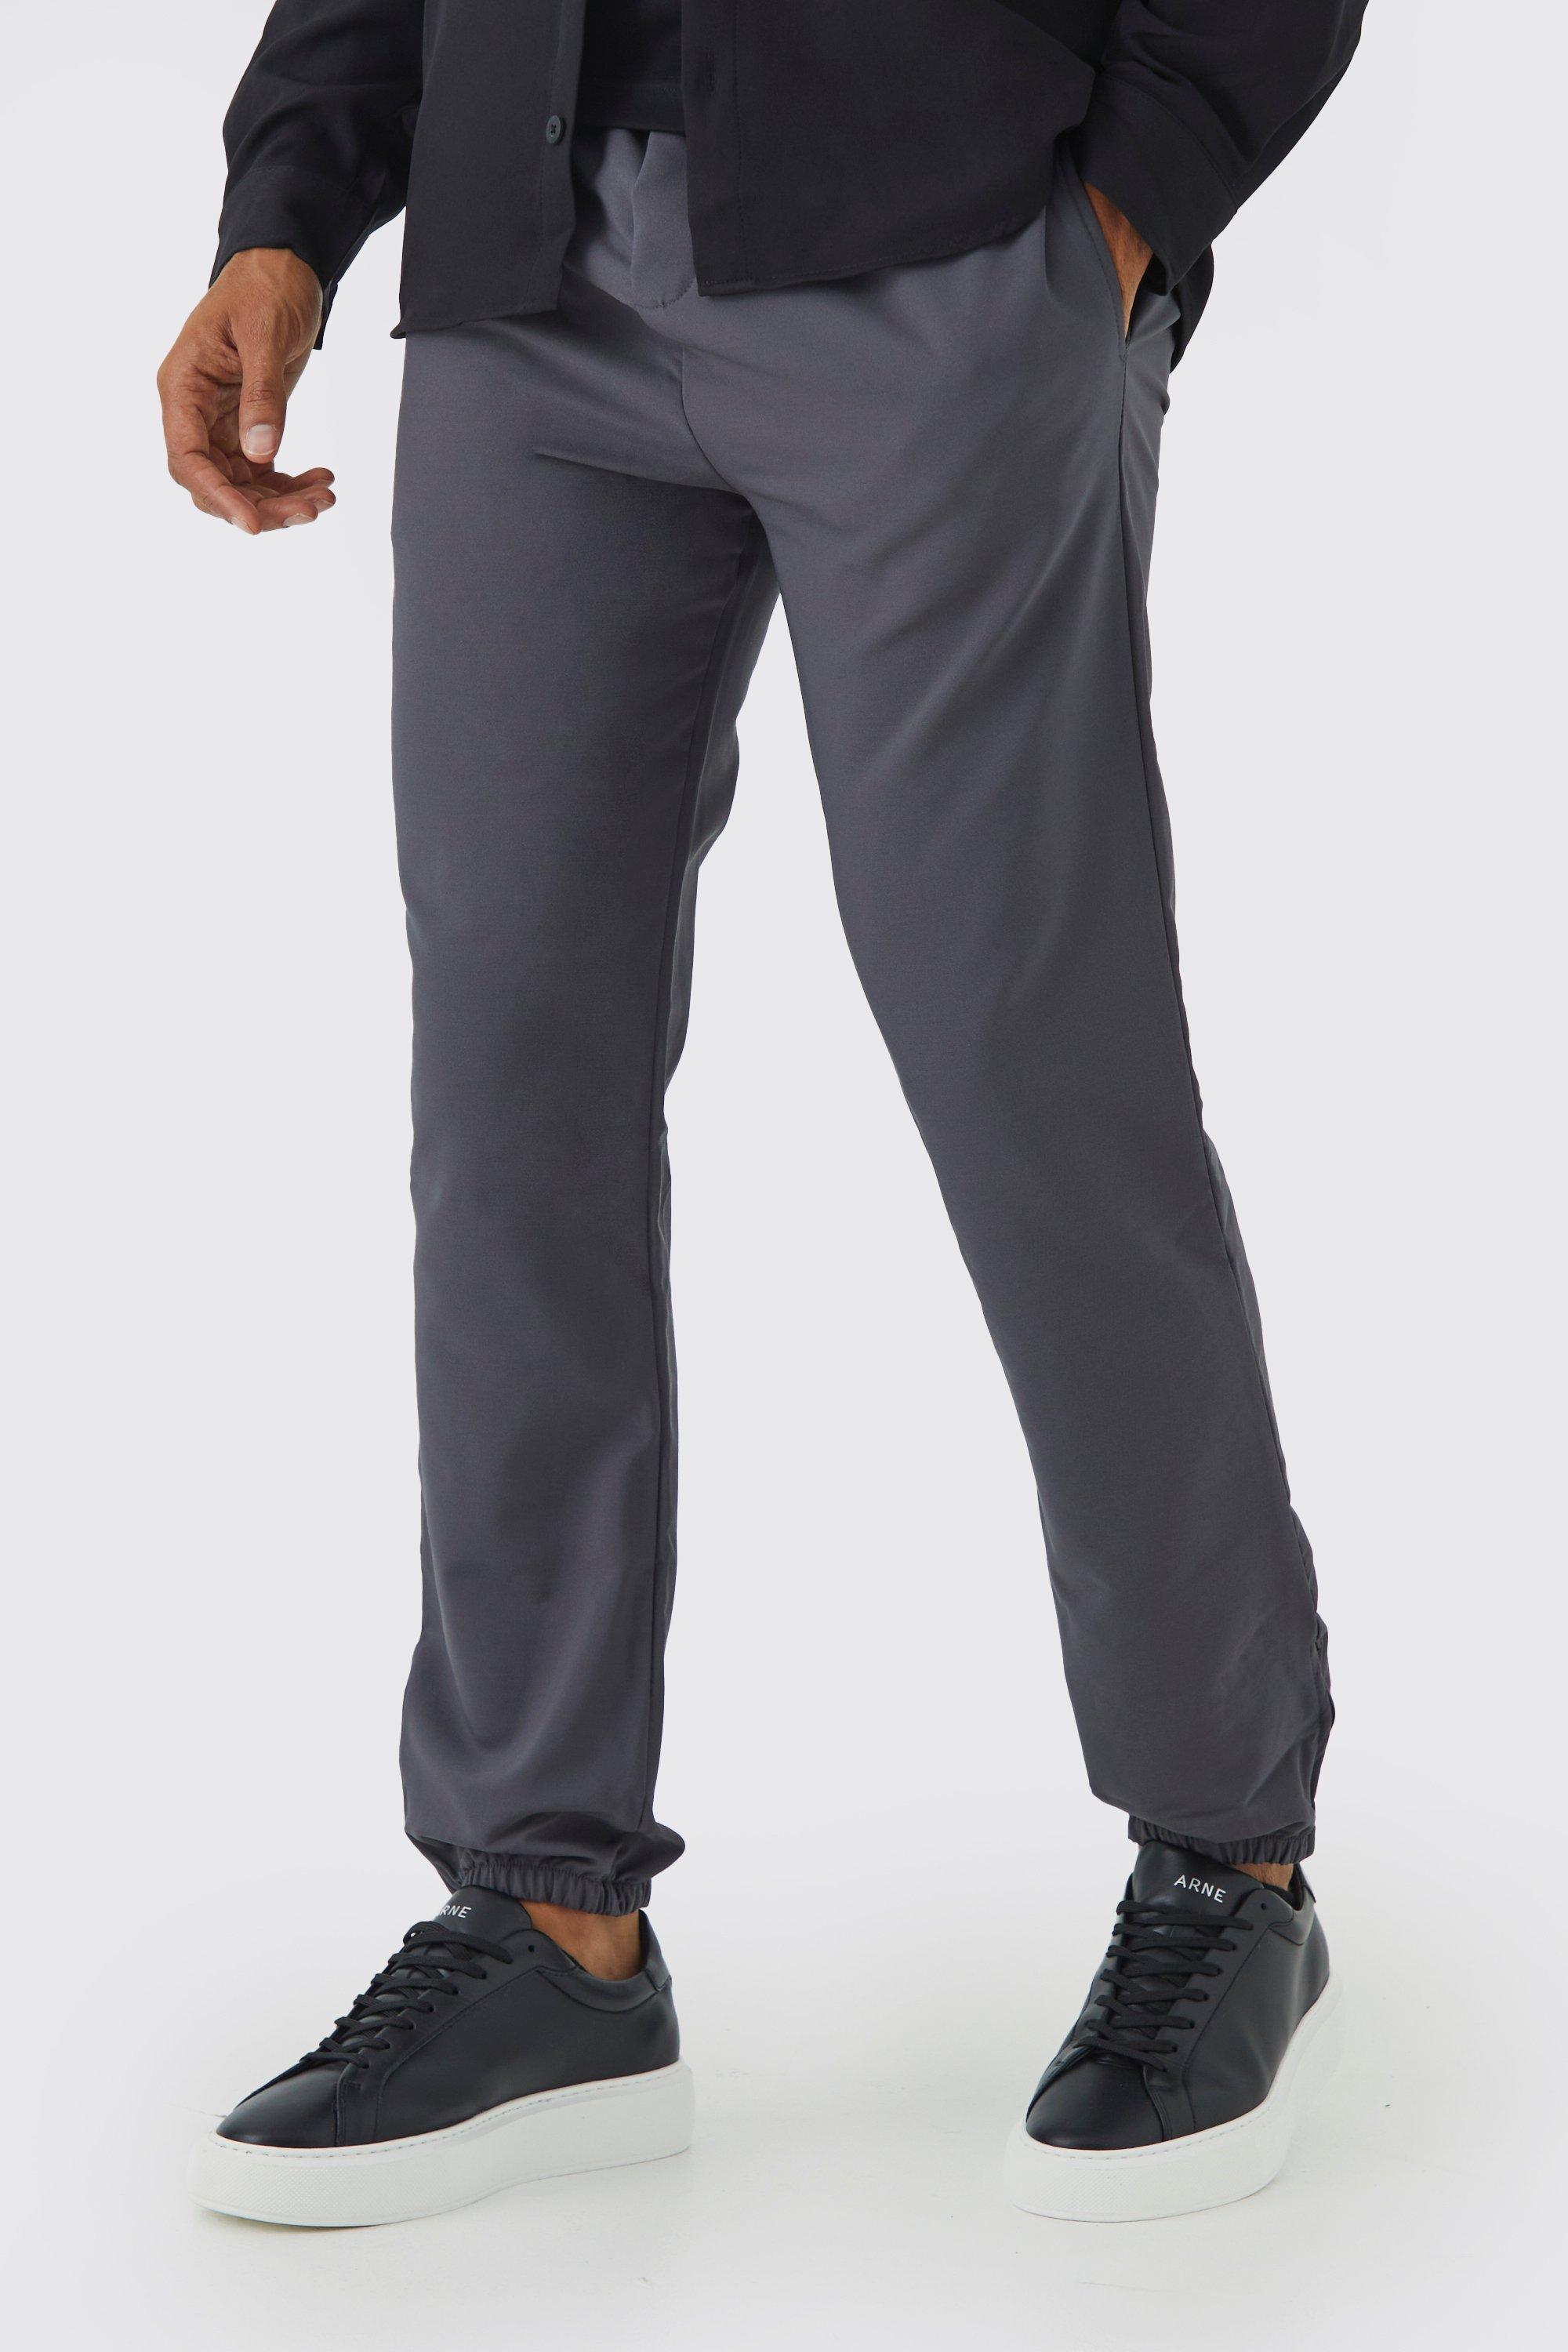 Mens Stretch Trousers, Mens Stretch Chinos